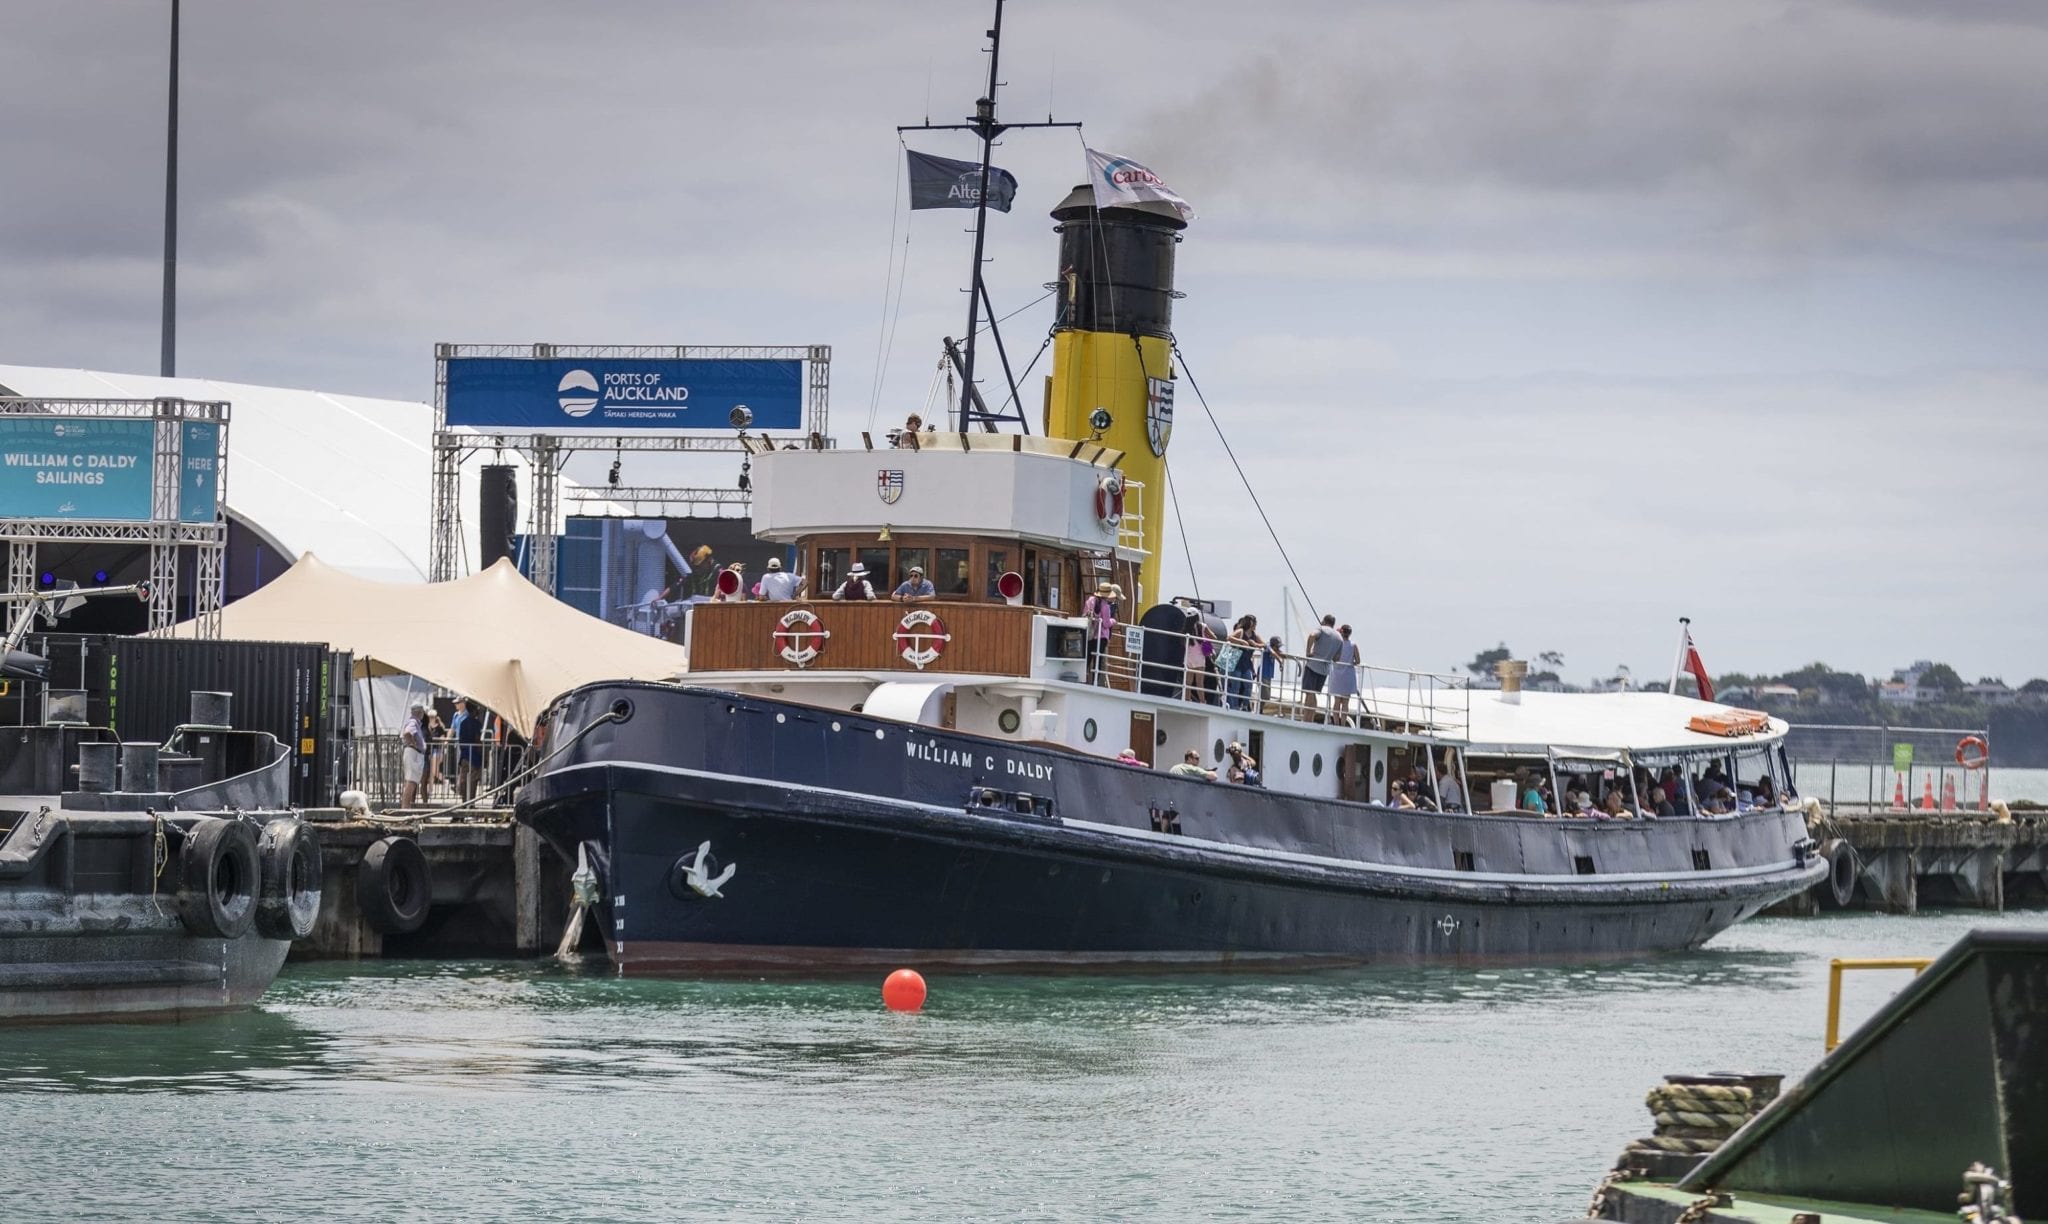 William C Daldy steam tugboat in the Ports of Auckland